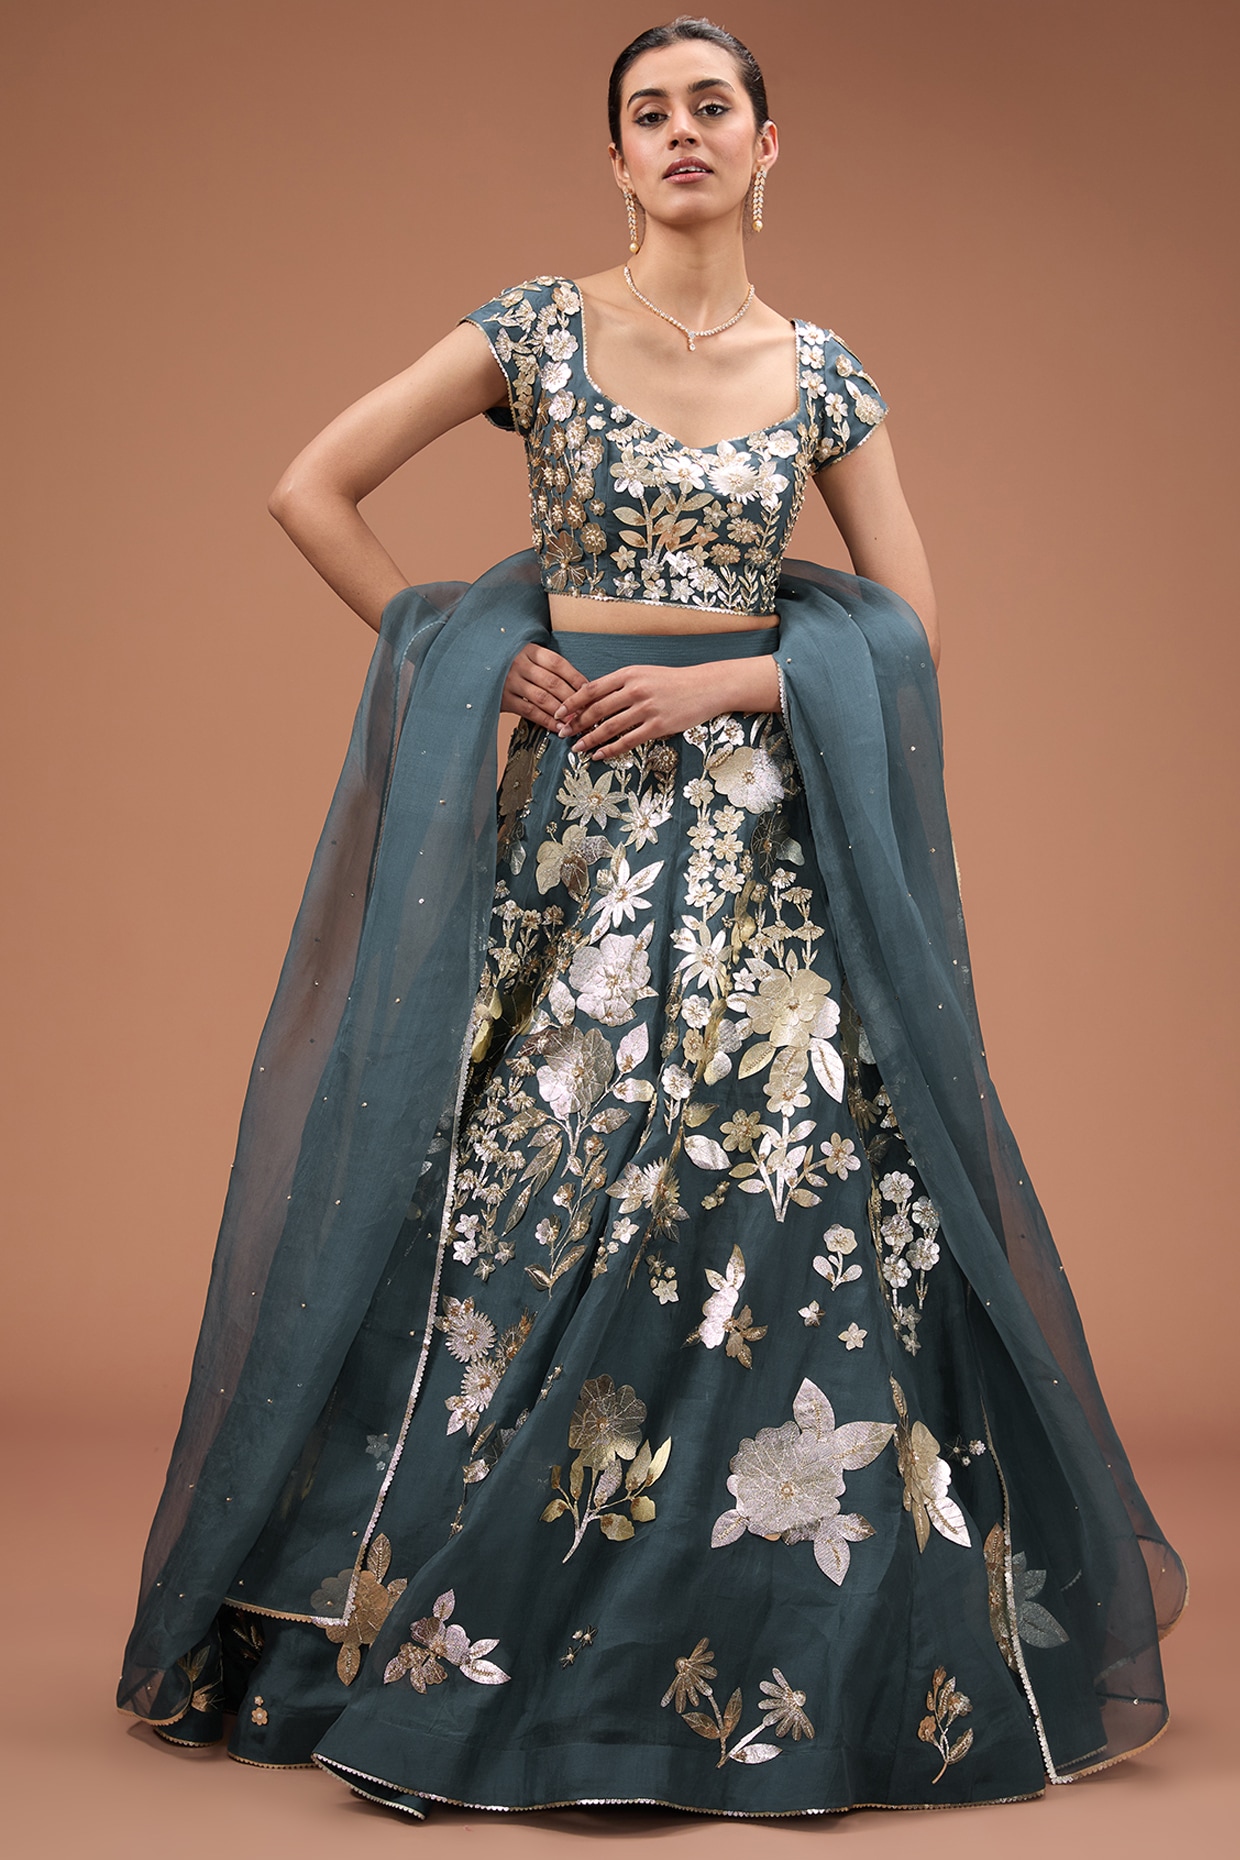 3D Floral Embroidered Lehengas by Yashodhara – South India Fashion